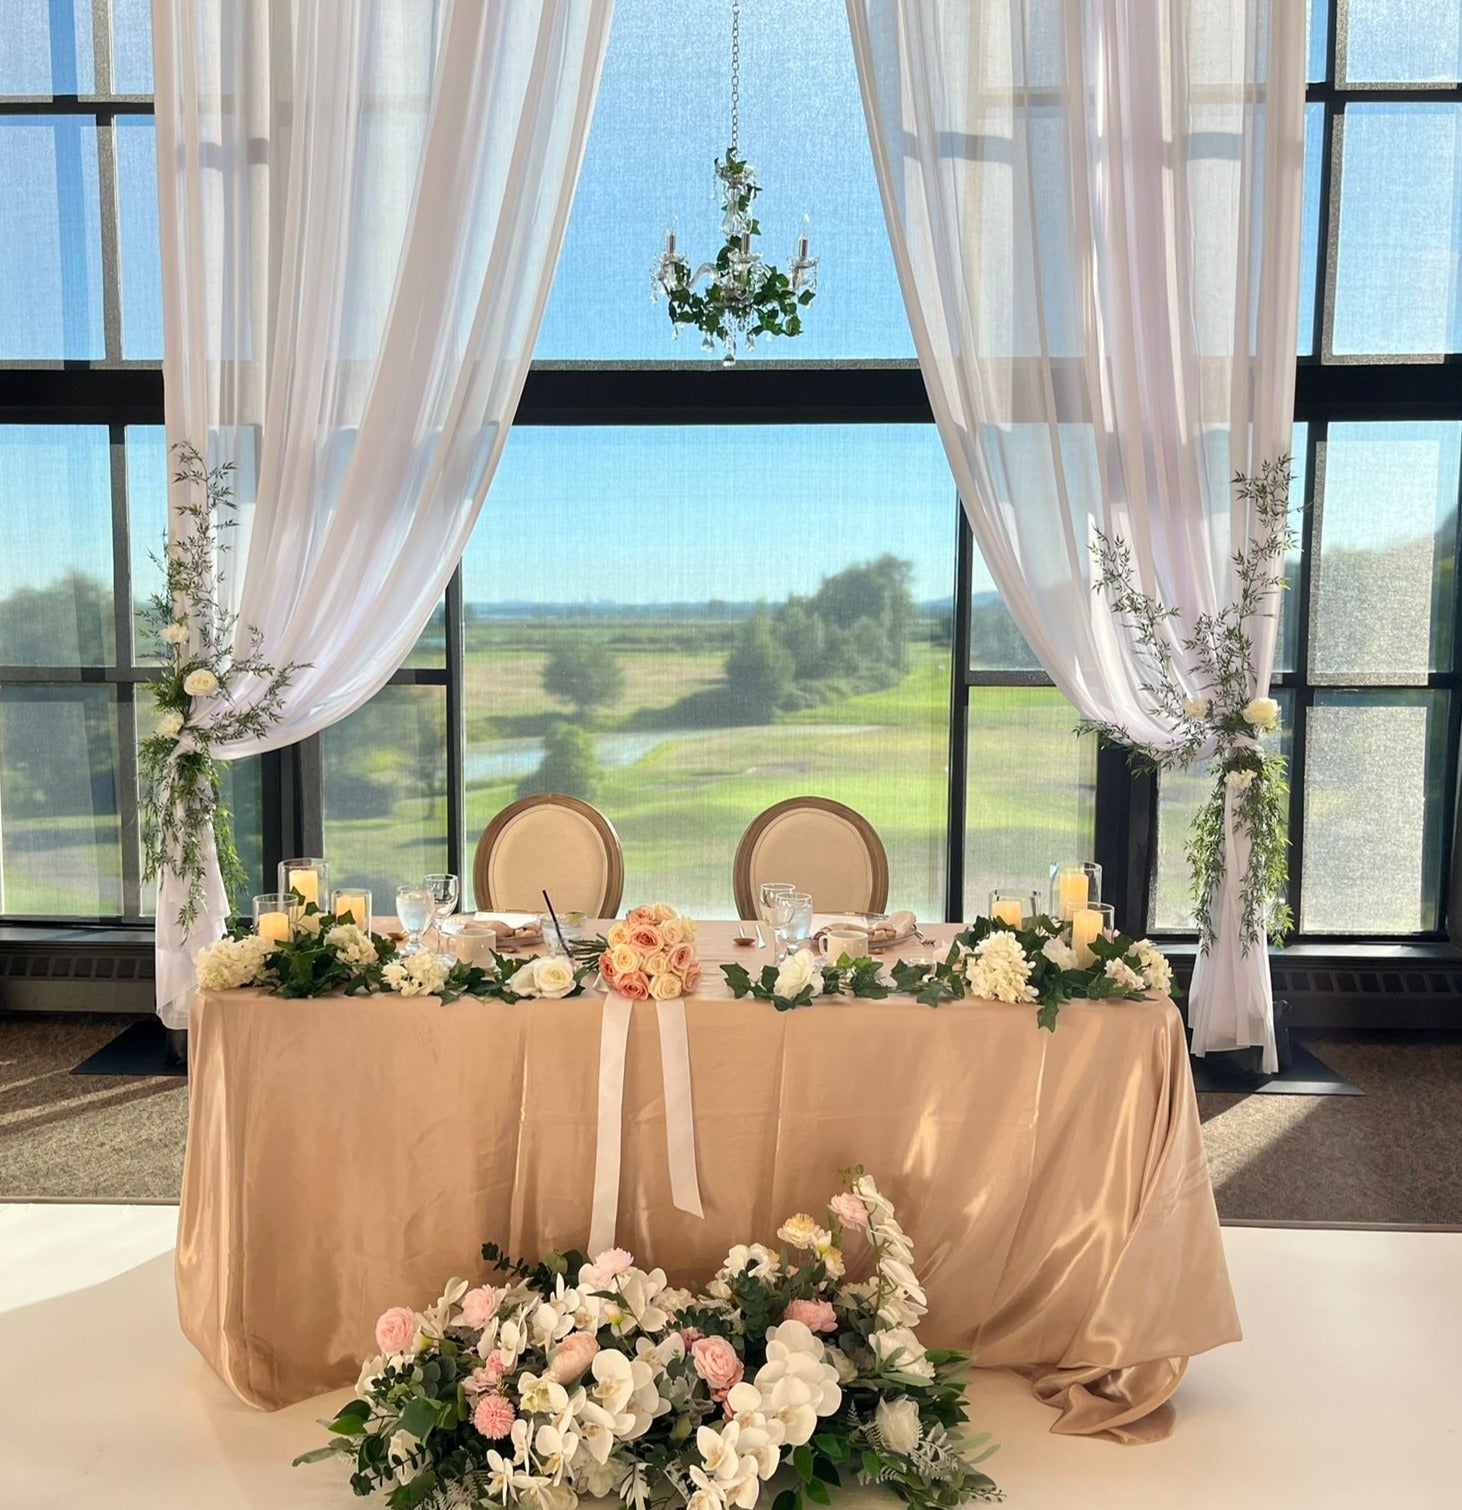 Silk faux long floral arrangement with roses and hydrangeas adorning a beautifully set table.